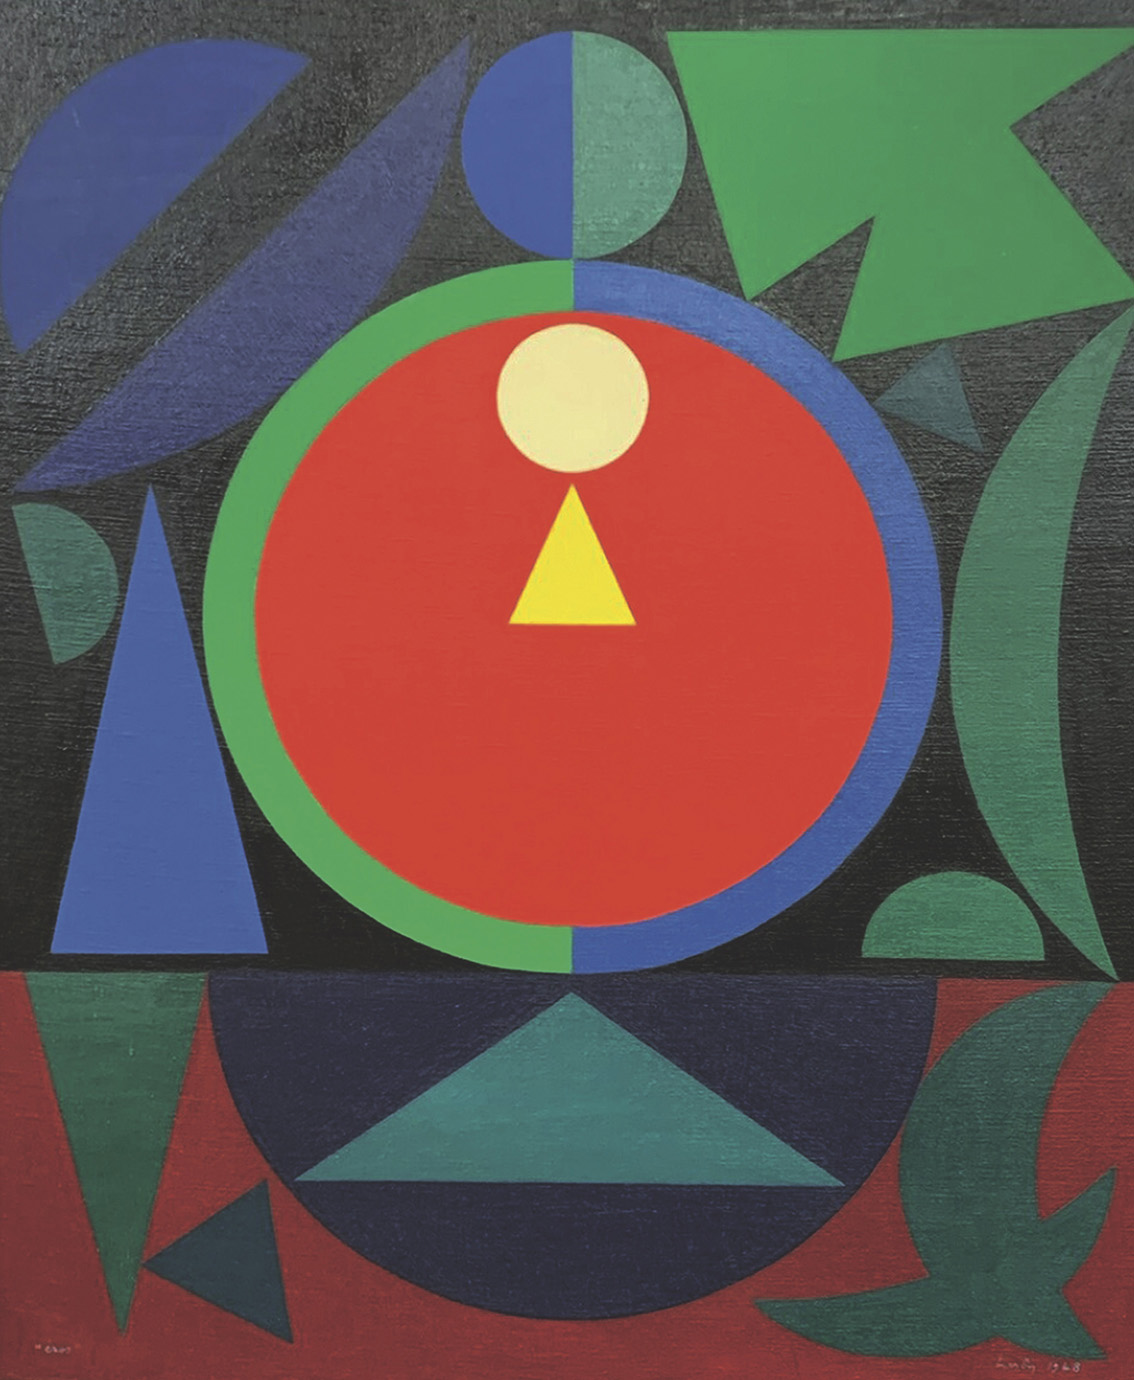 Auguste Herbin: A Committed Artist